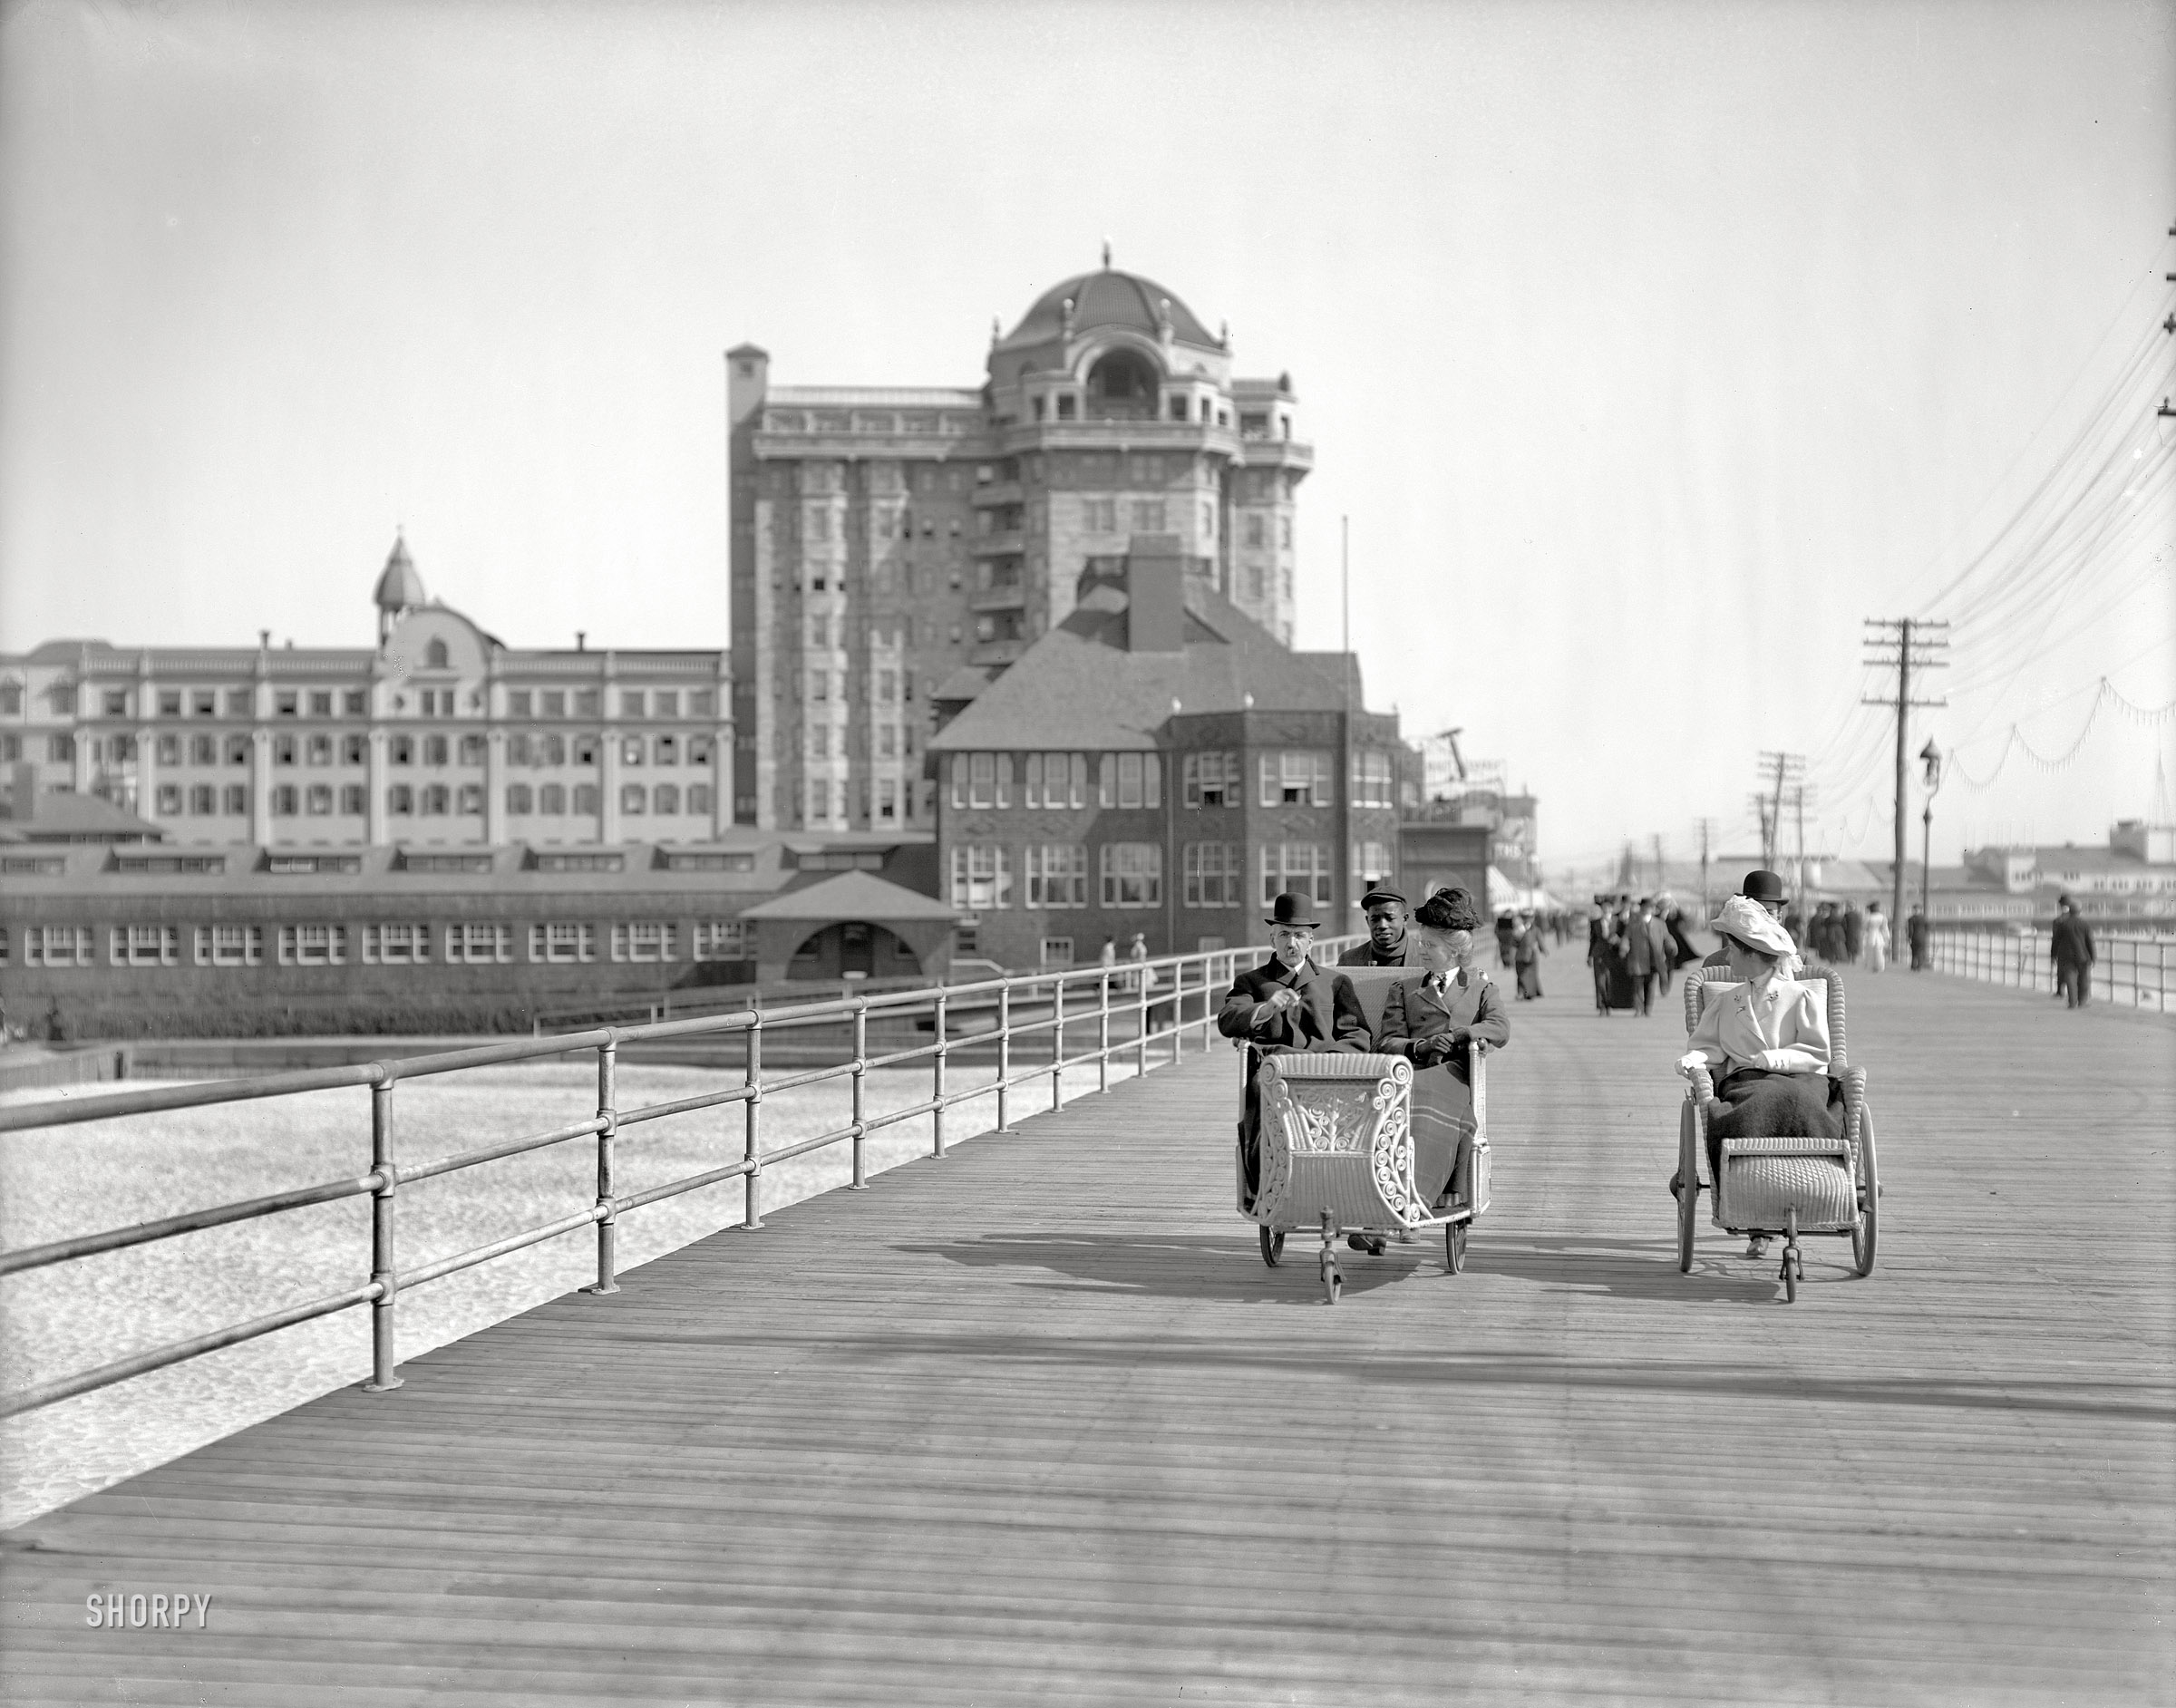 The Jersey shore circa 1906. "Rolling chairs on the Boardwalk, Atlantic City." Hotel Traymore in the background. 8x10 inch glass negative. View full size.